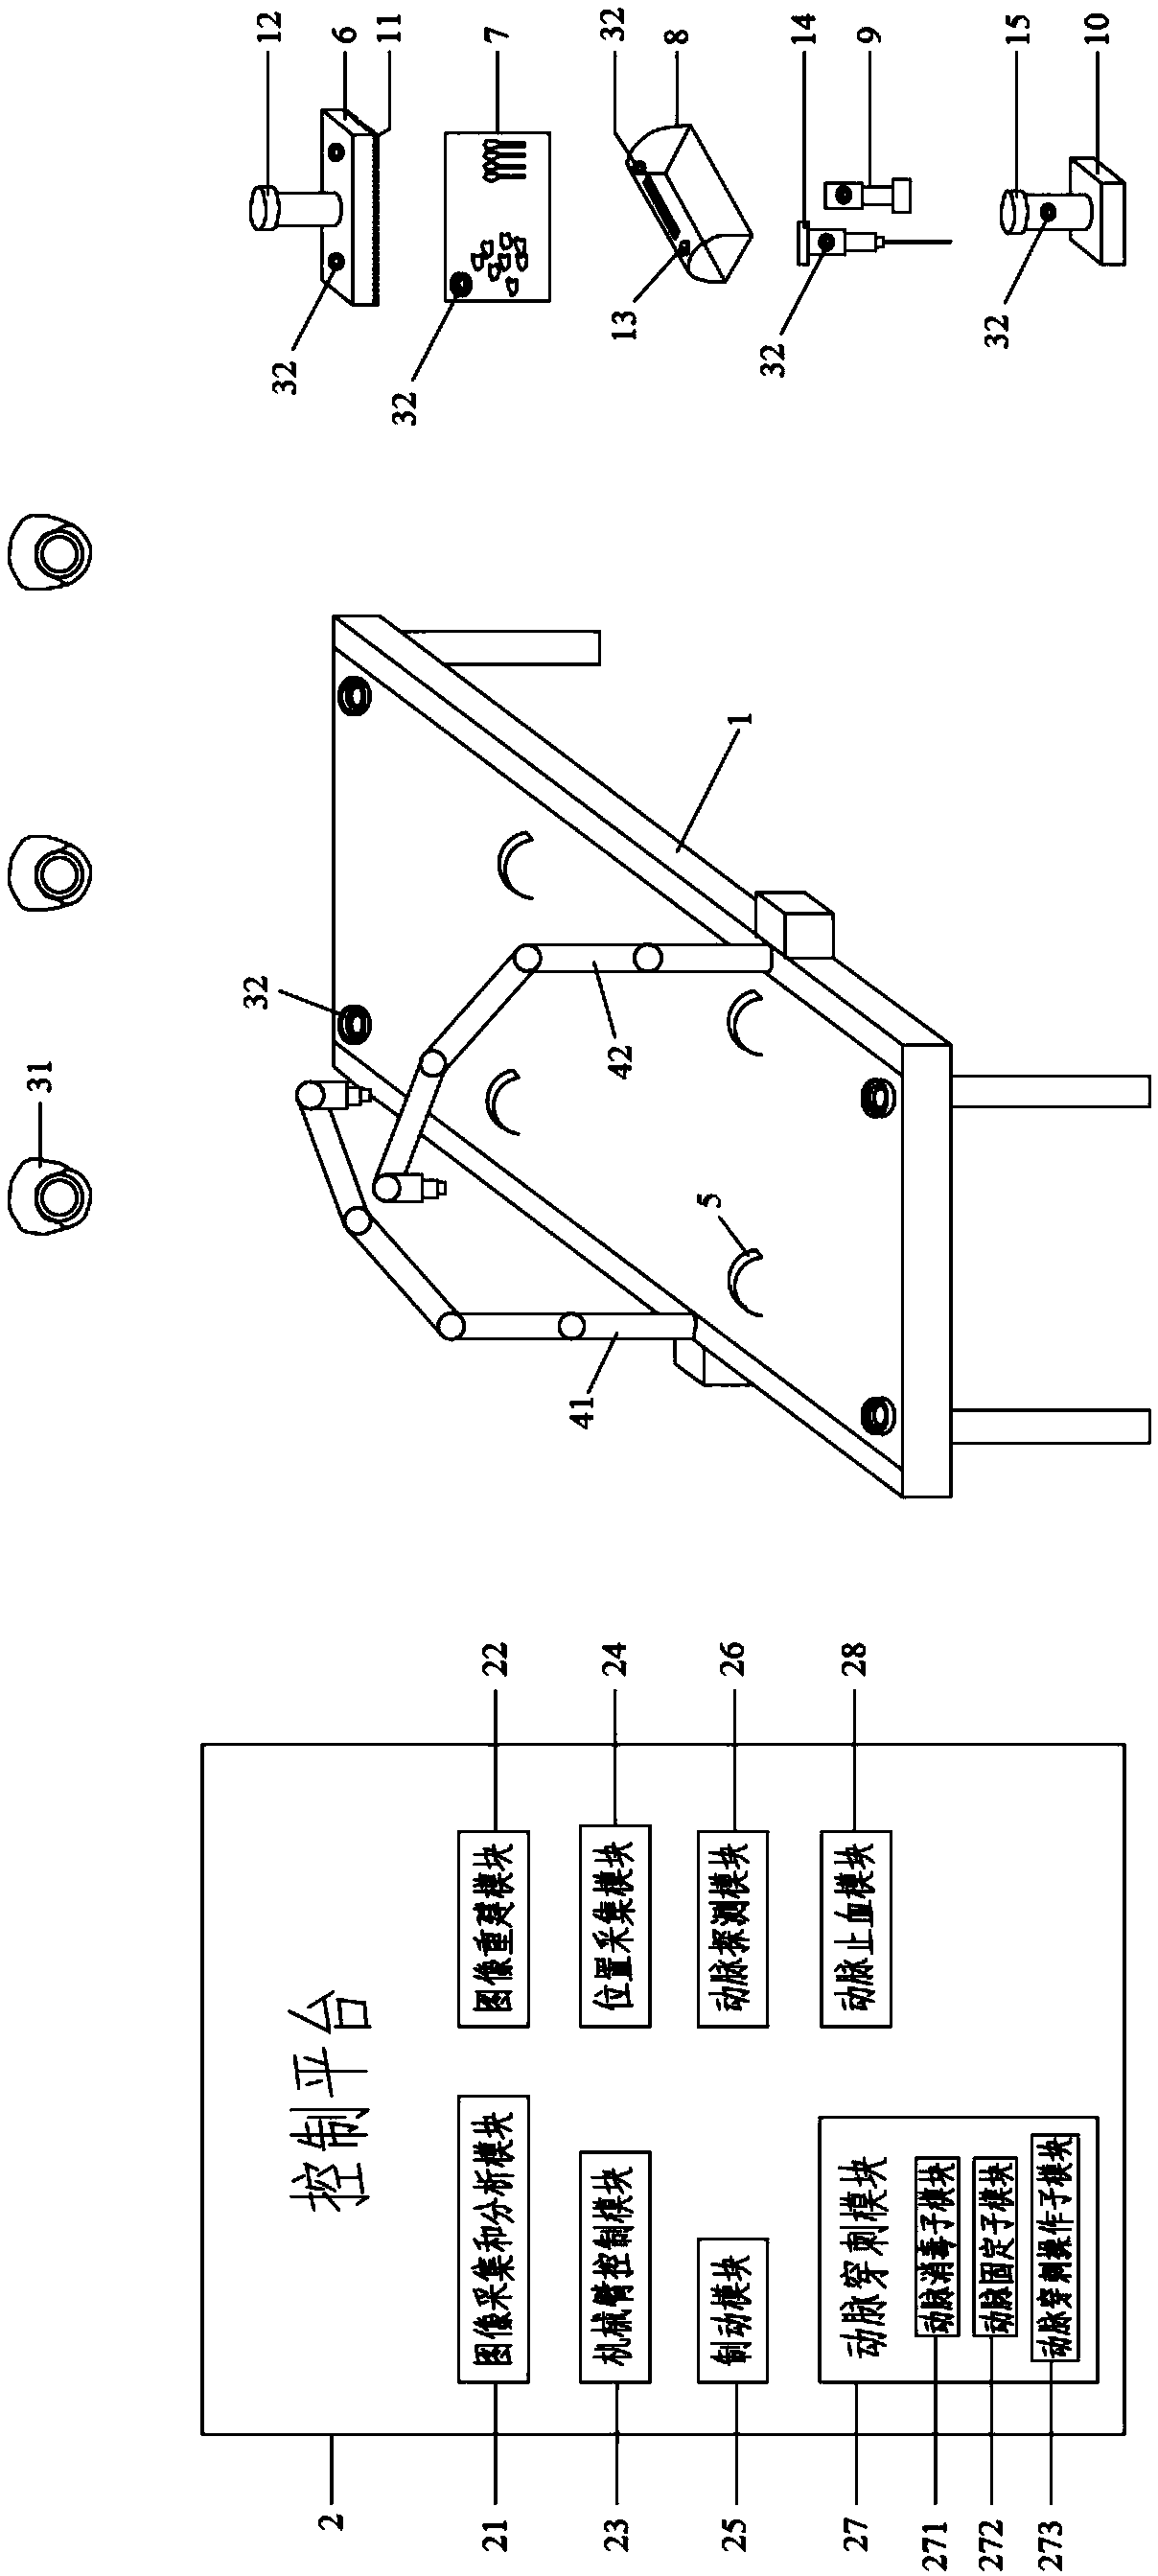 Arterial puncture system and method for determining arterial puncture position